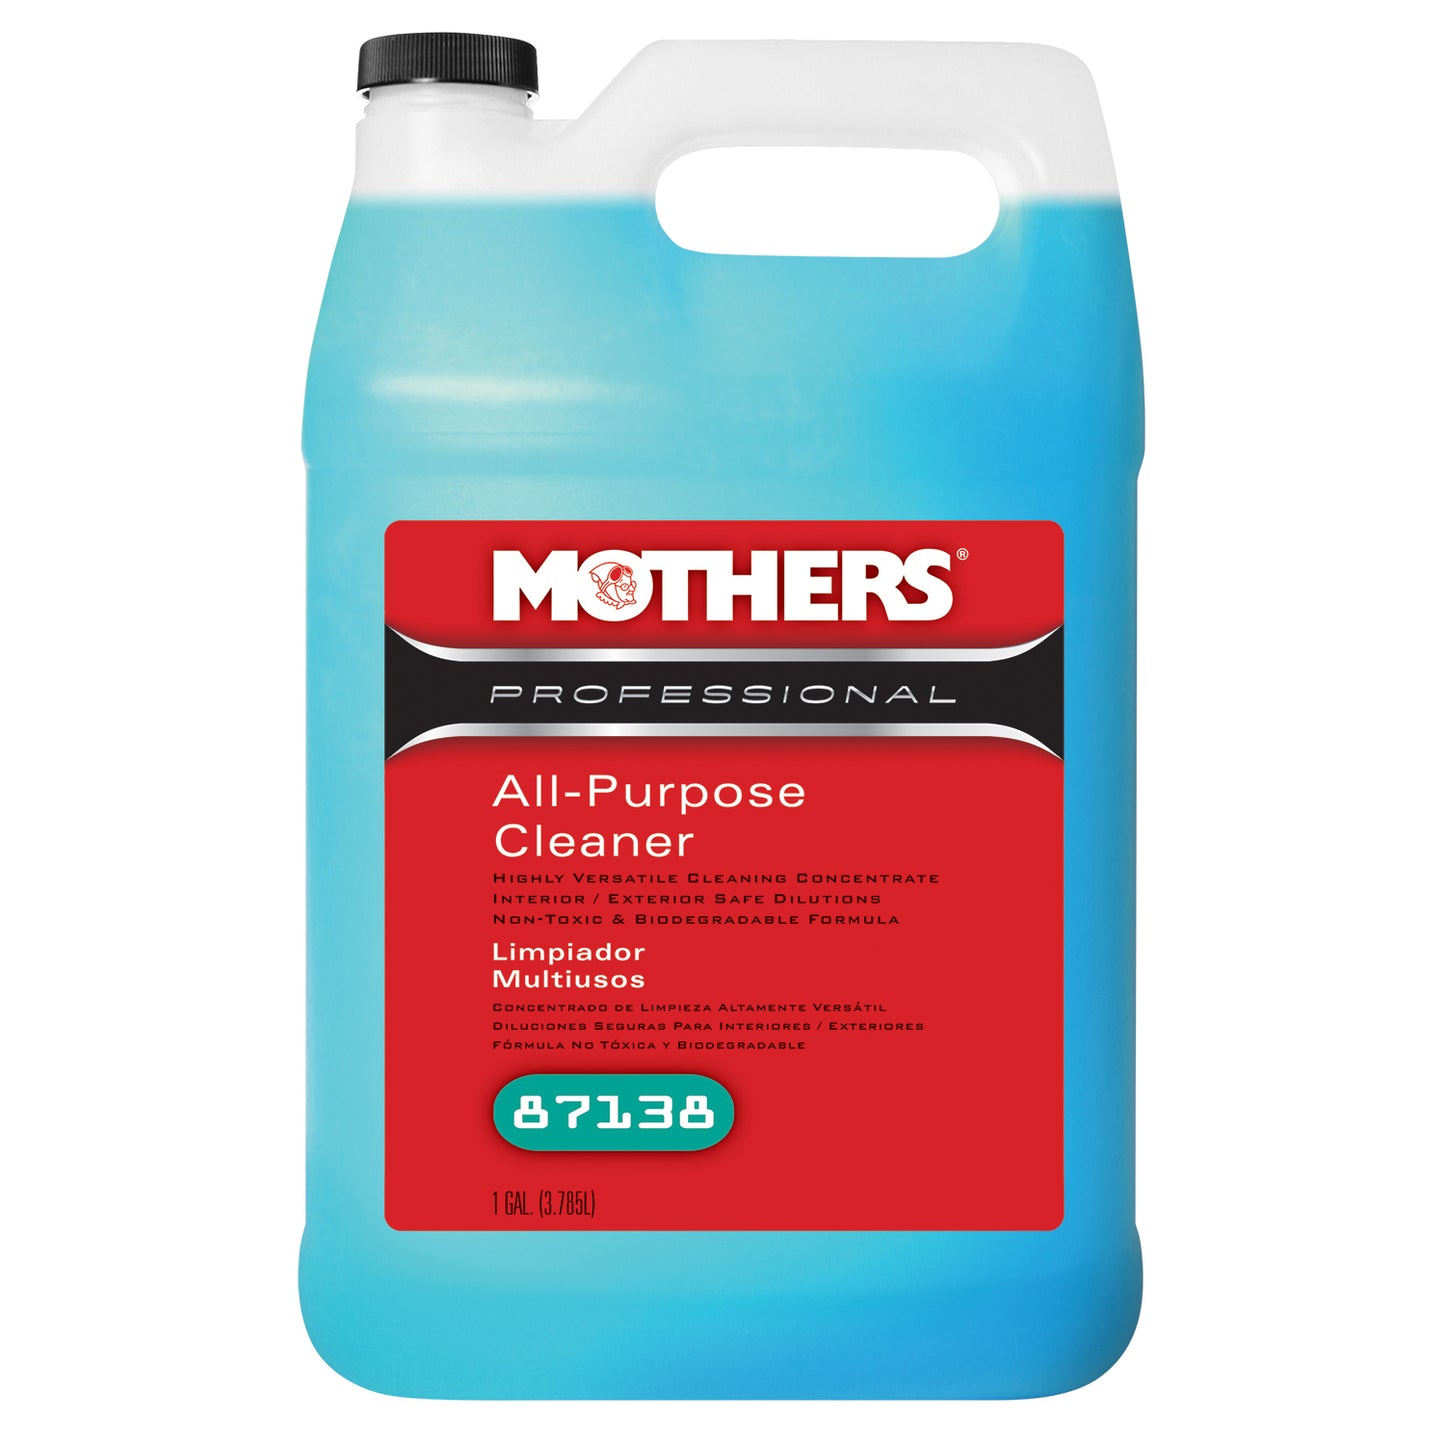 Mothers All-Purpose Cleaner